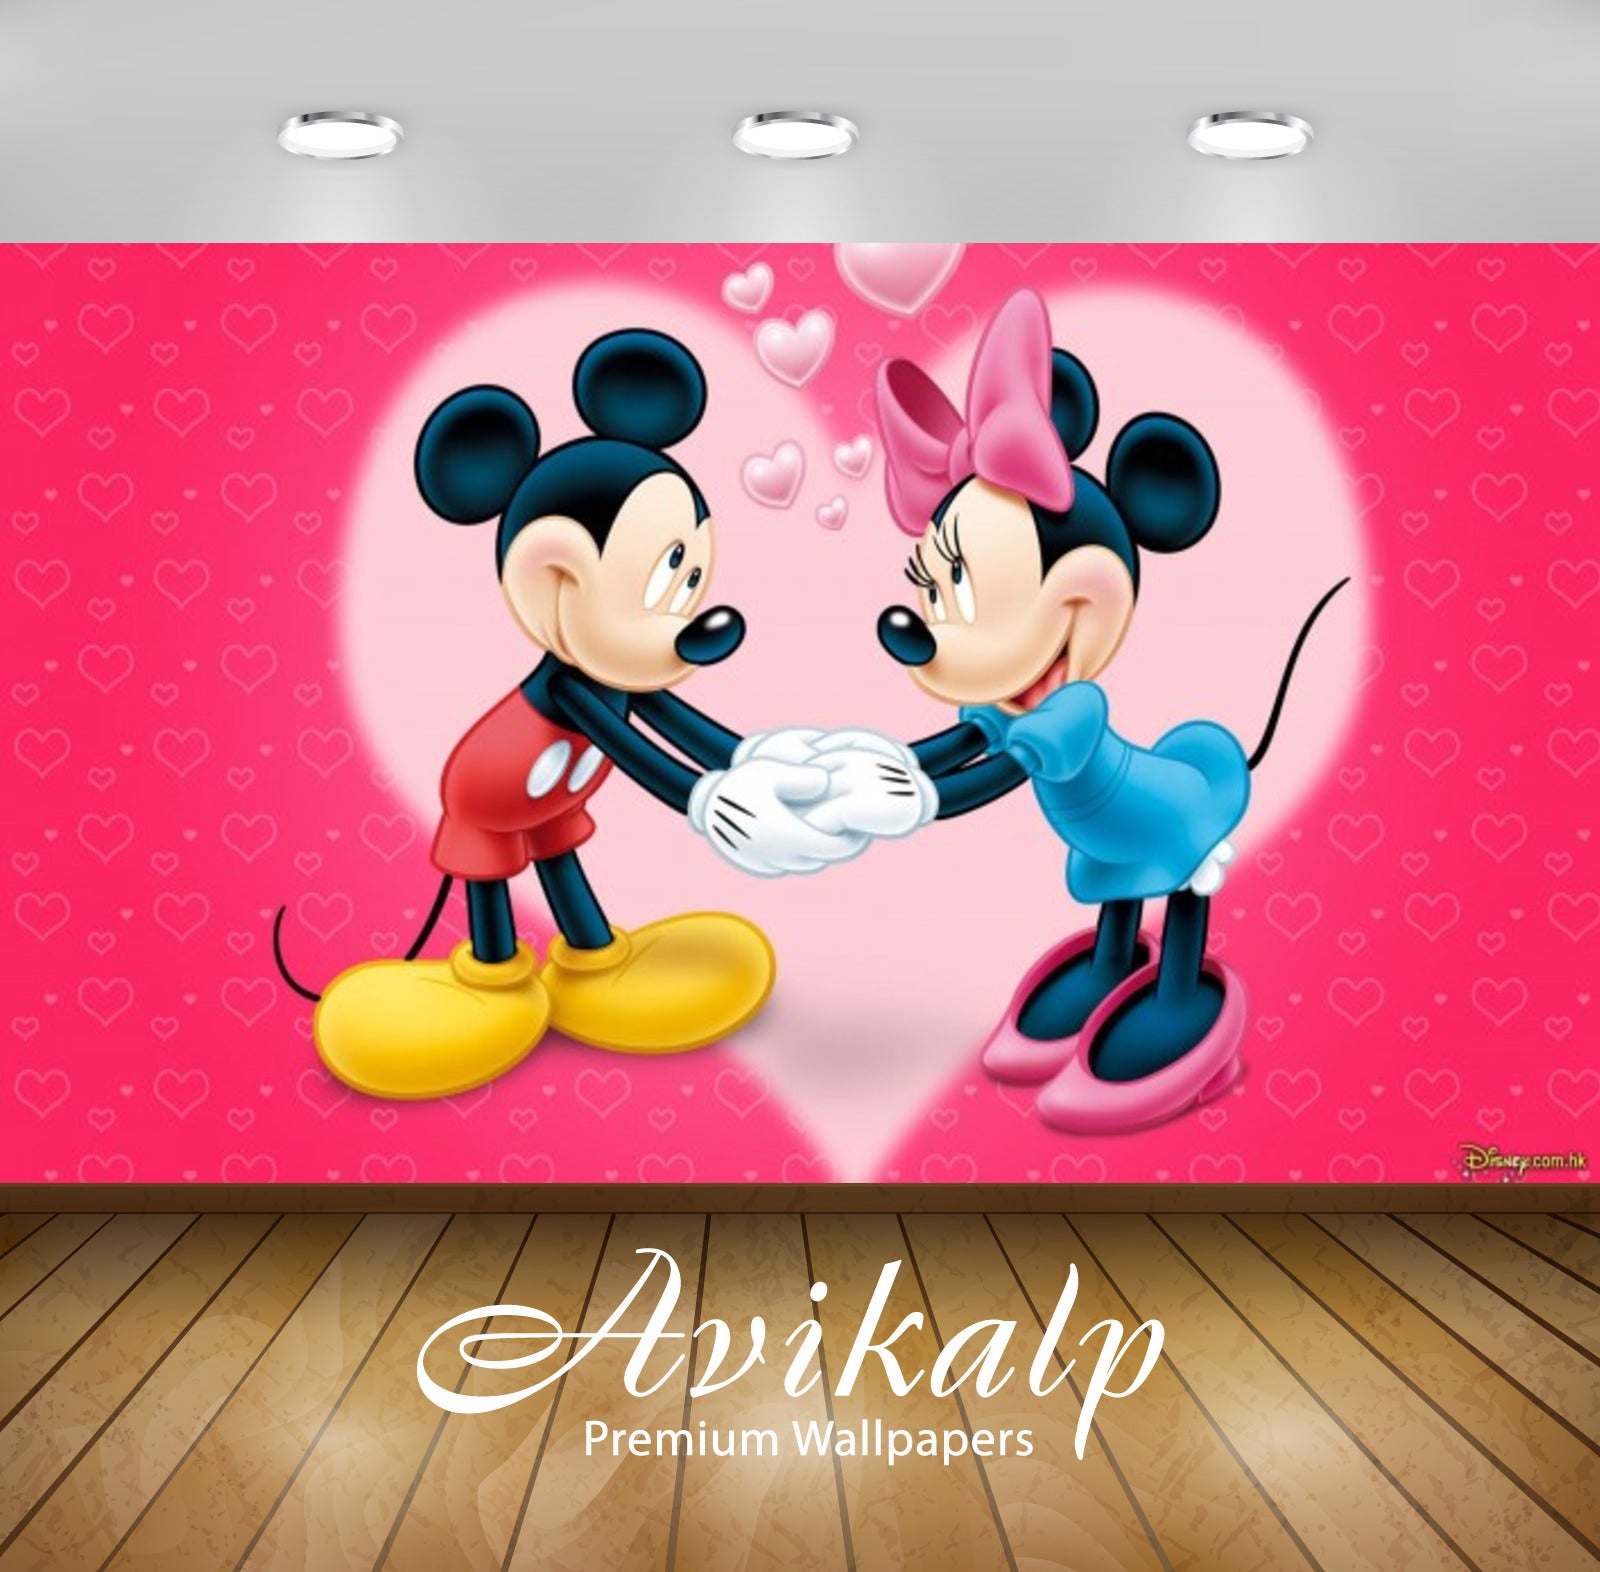 Avikalp Exclusive Awi2109 Mickey Mouse Mini Love  Full HD Wallpapers for Living room, Hall, Kids Roo